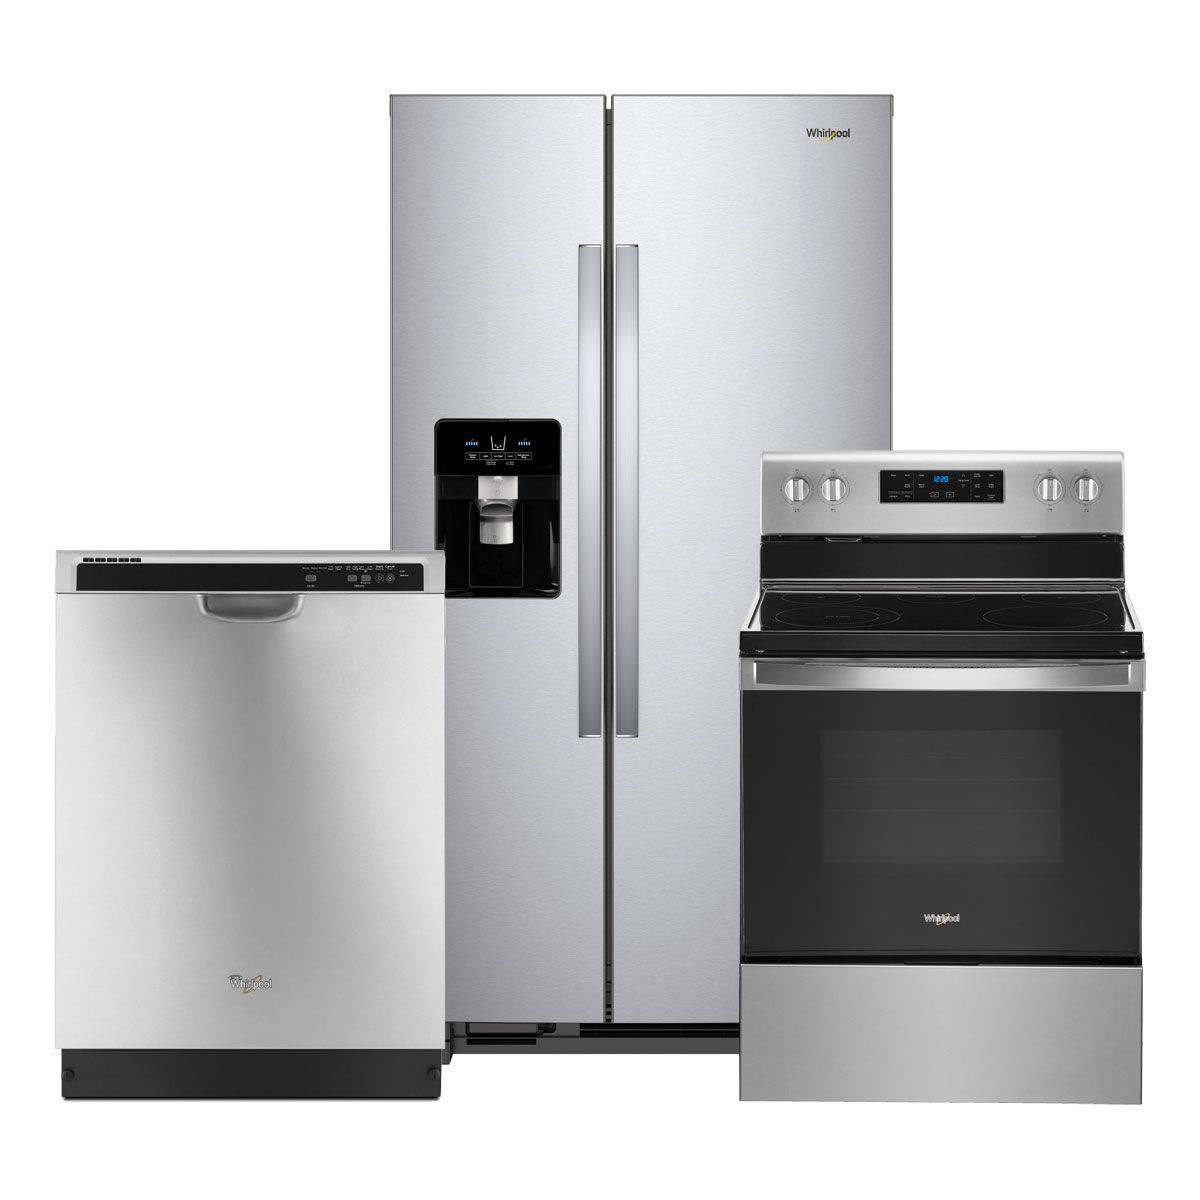 Stainless steel Kitchen Appliance Packages at